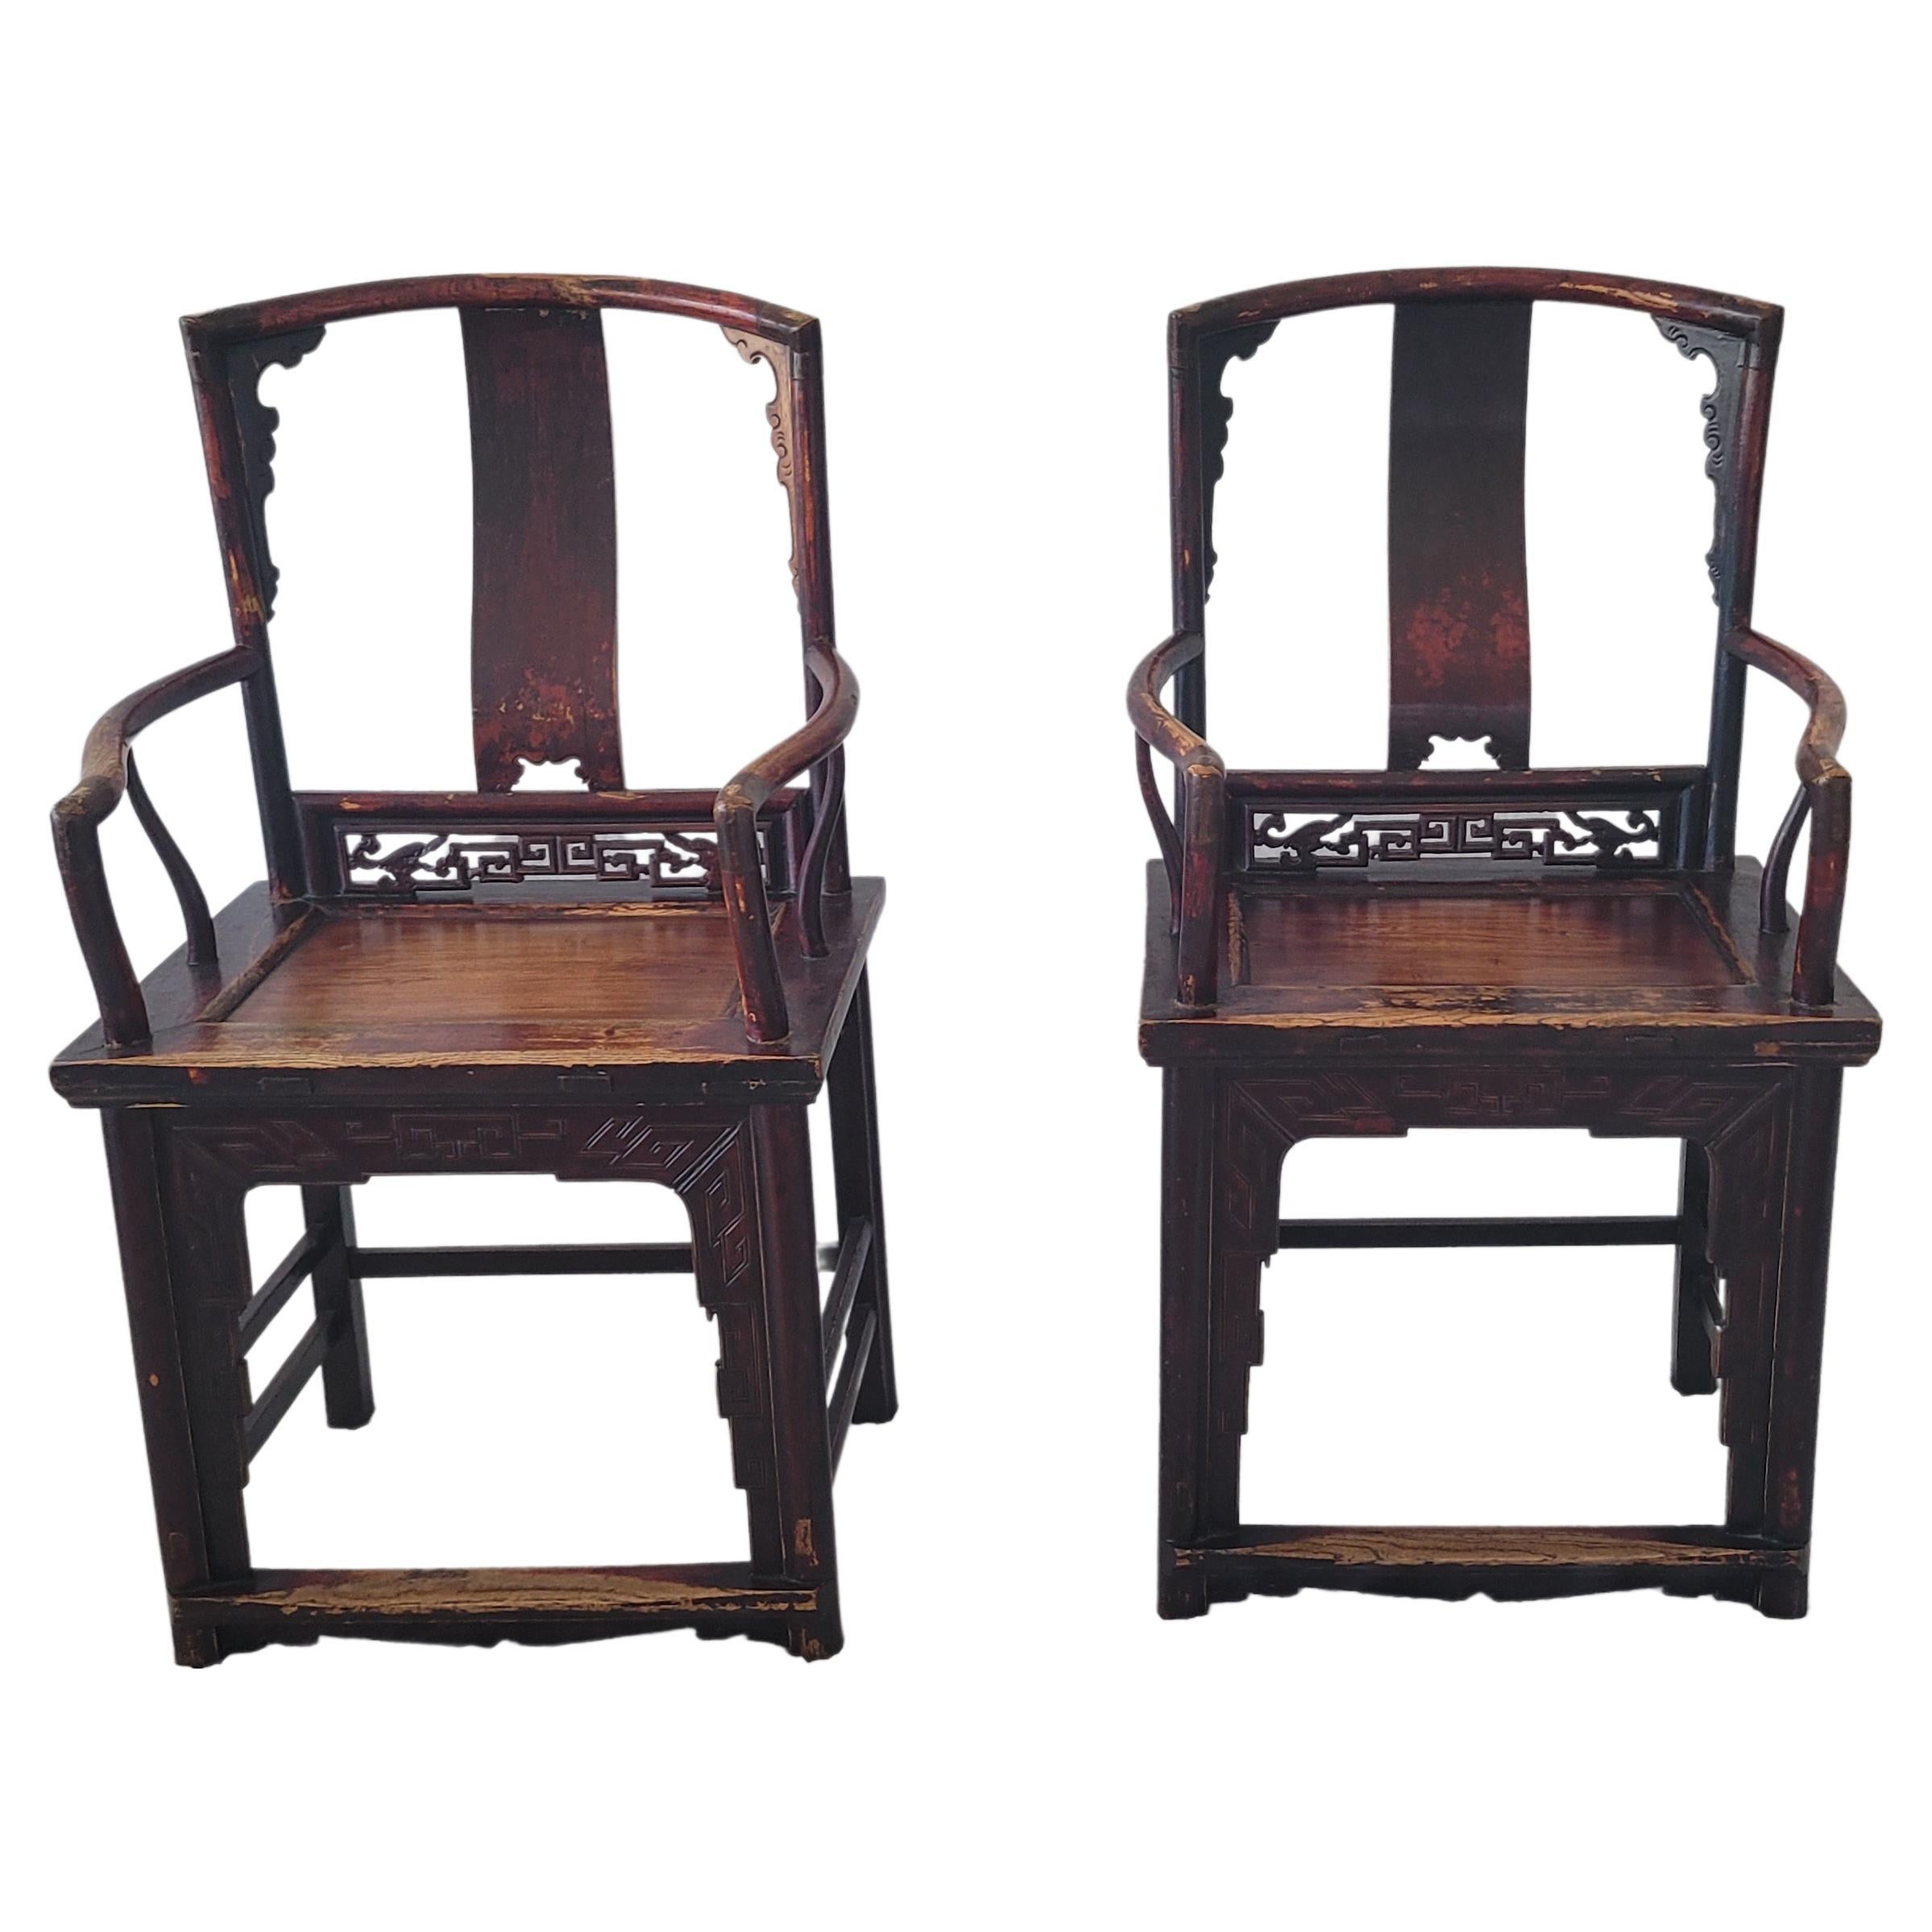 Pair of Southern Official's Hat Chairs - 19th Century